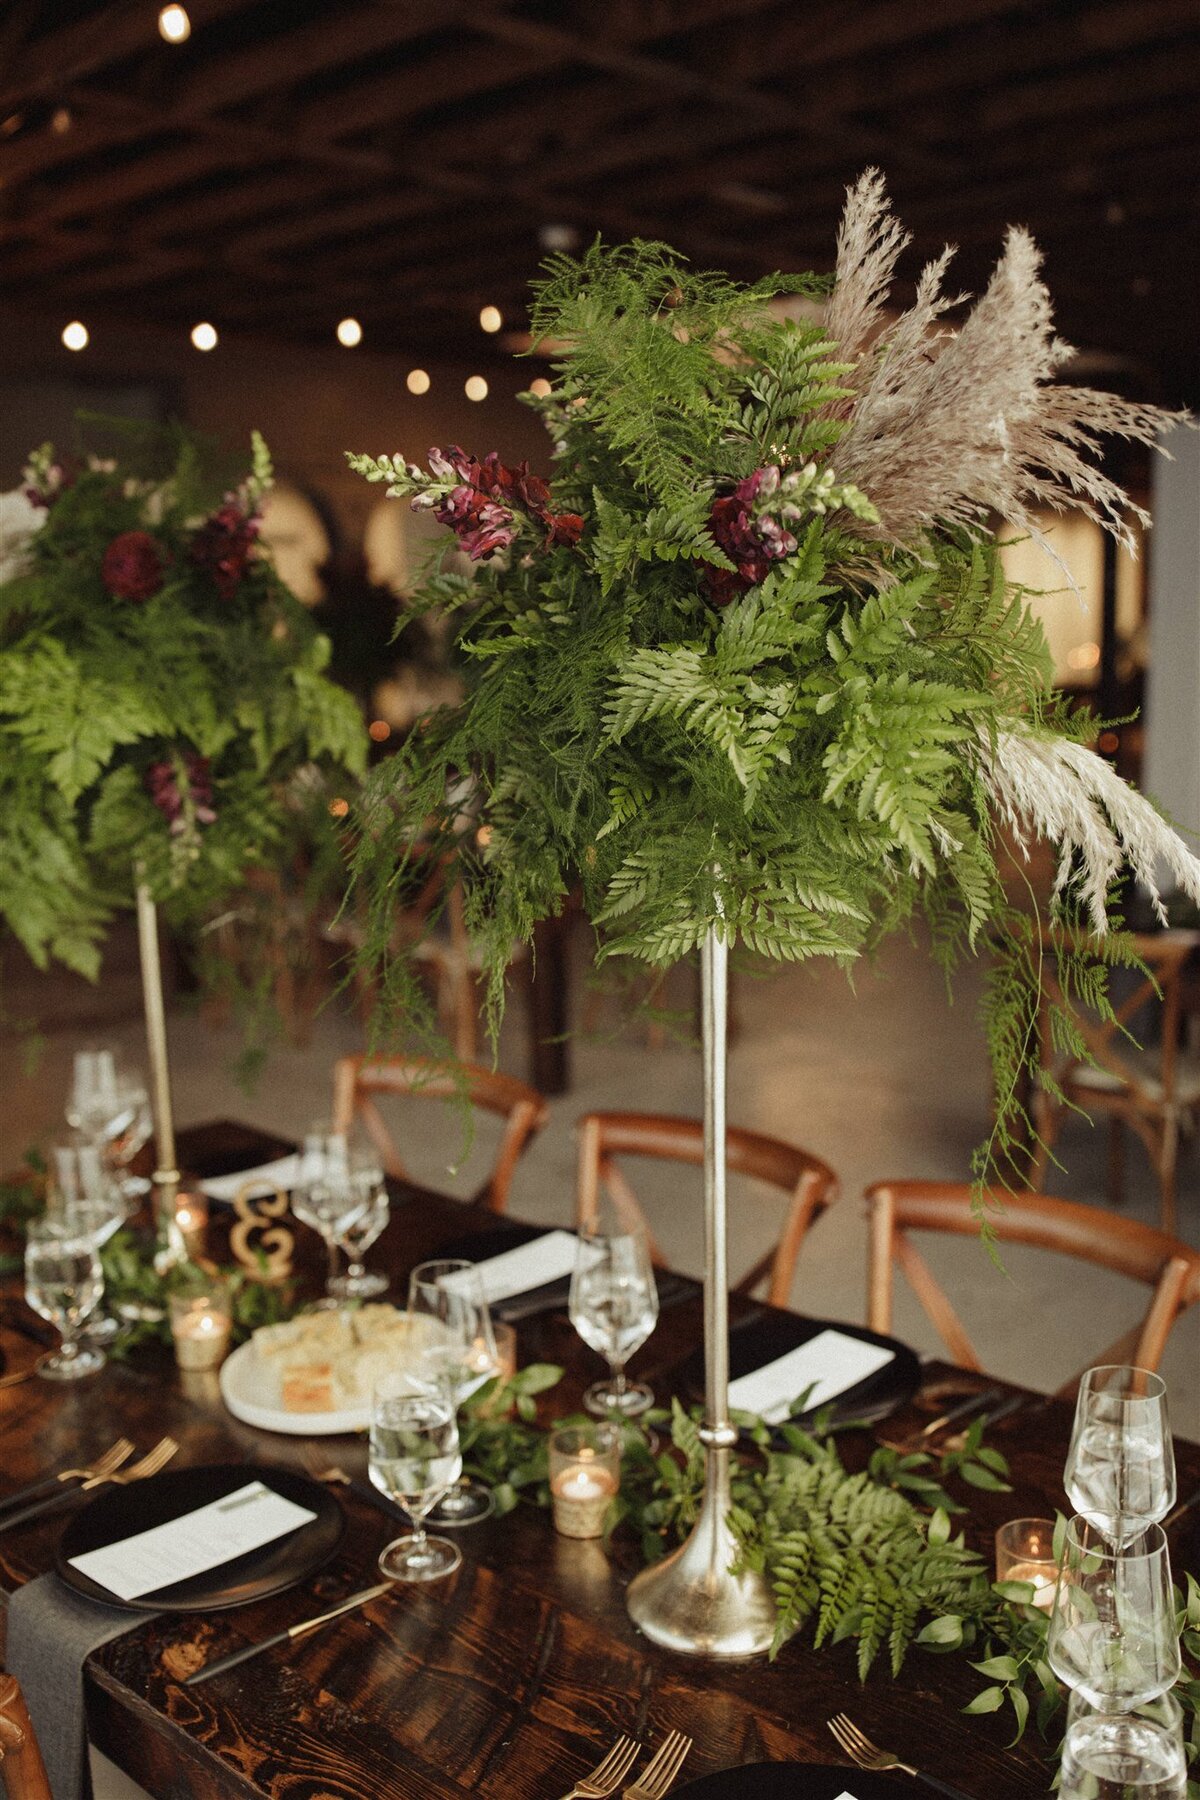 Tall greenry wedding florals for reception tables at the St Vrain, Longmont wedding venue